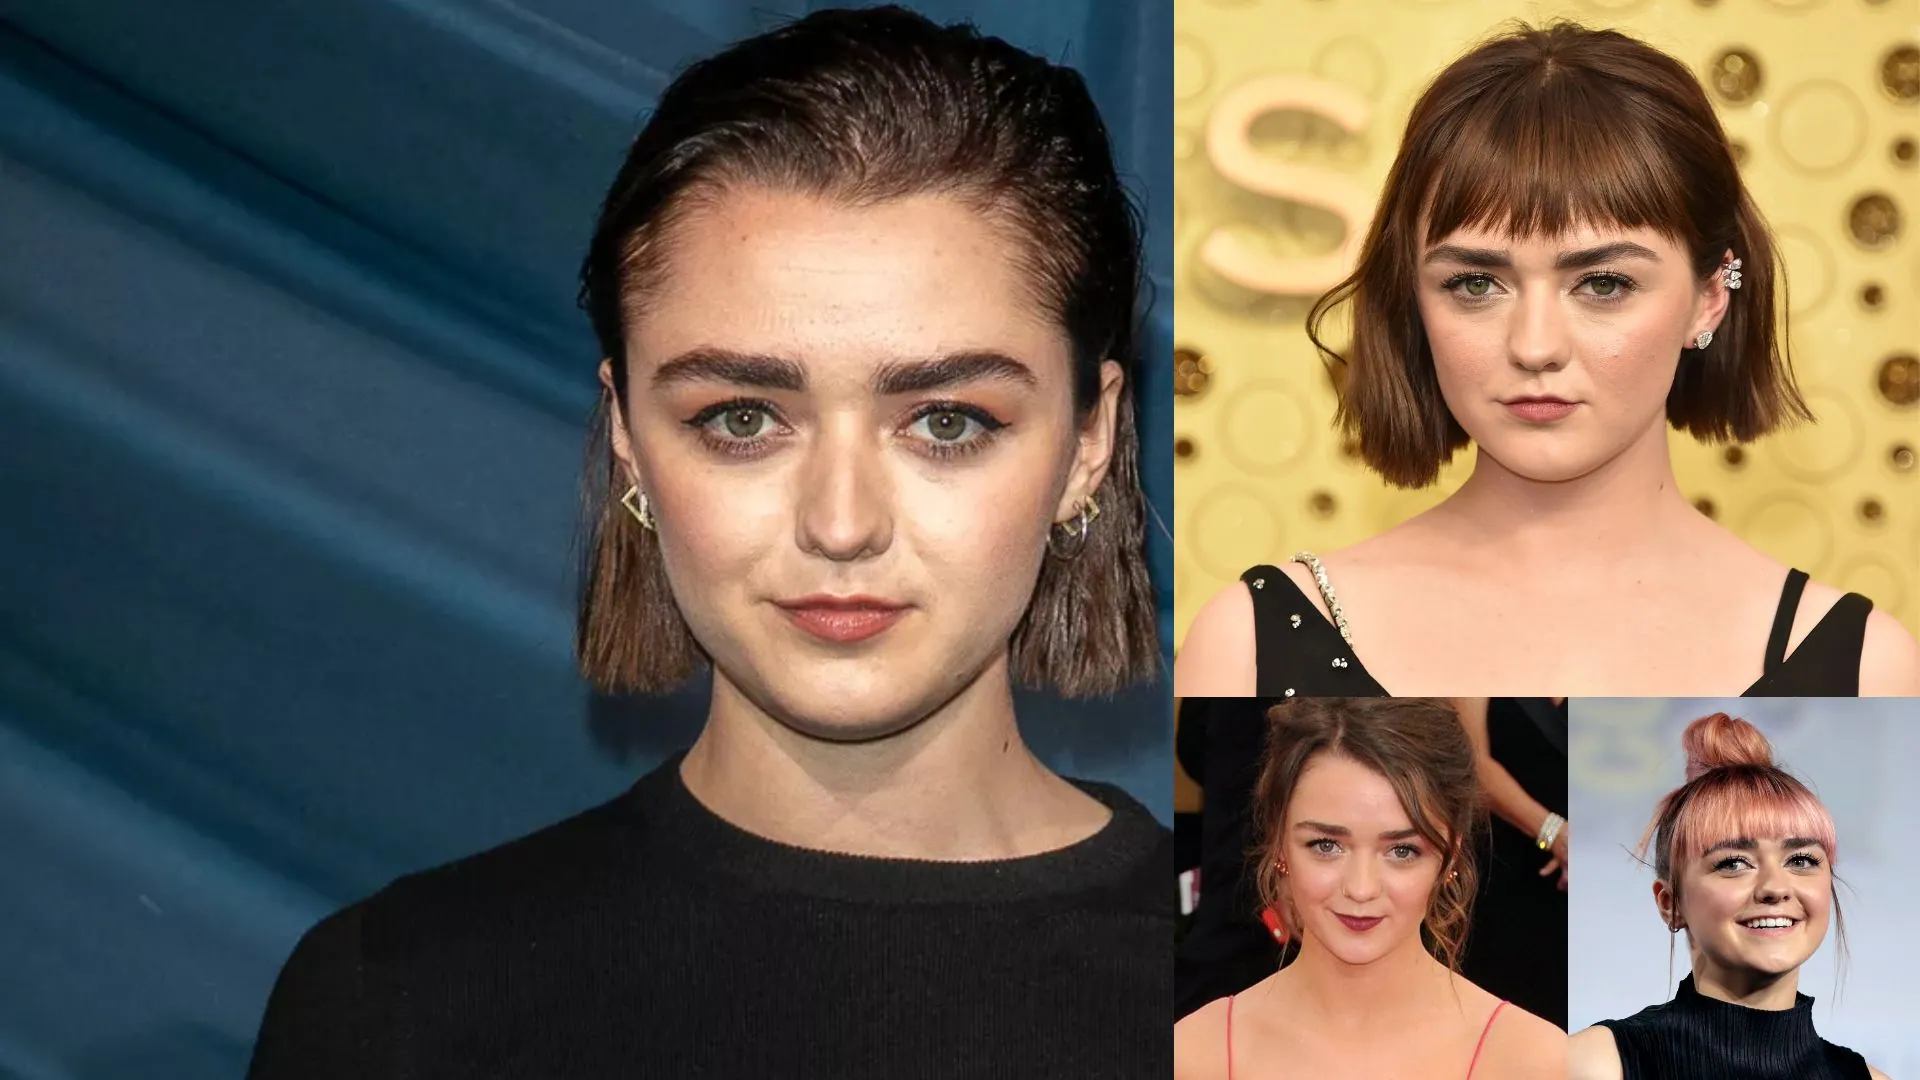 What does Maisie Williams explain?